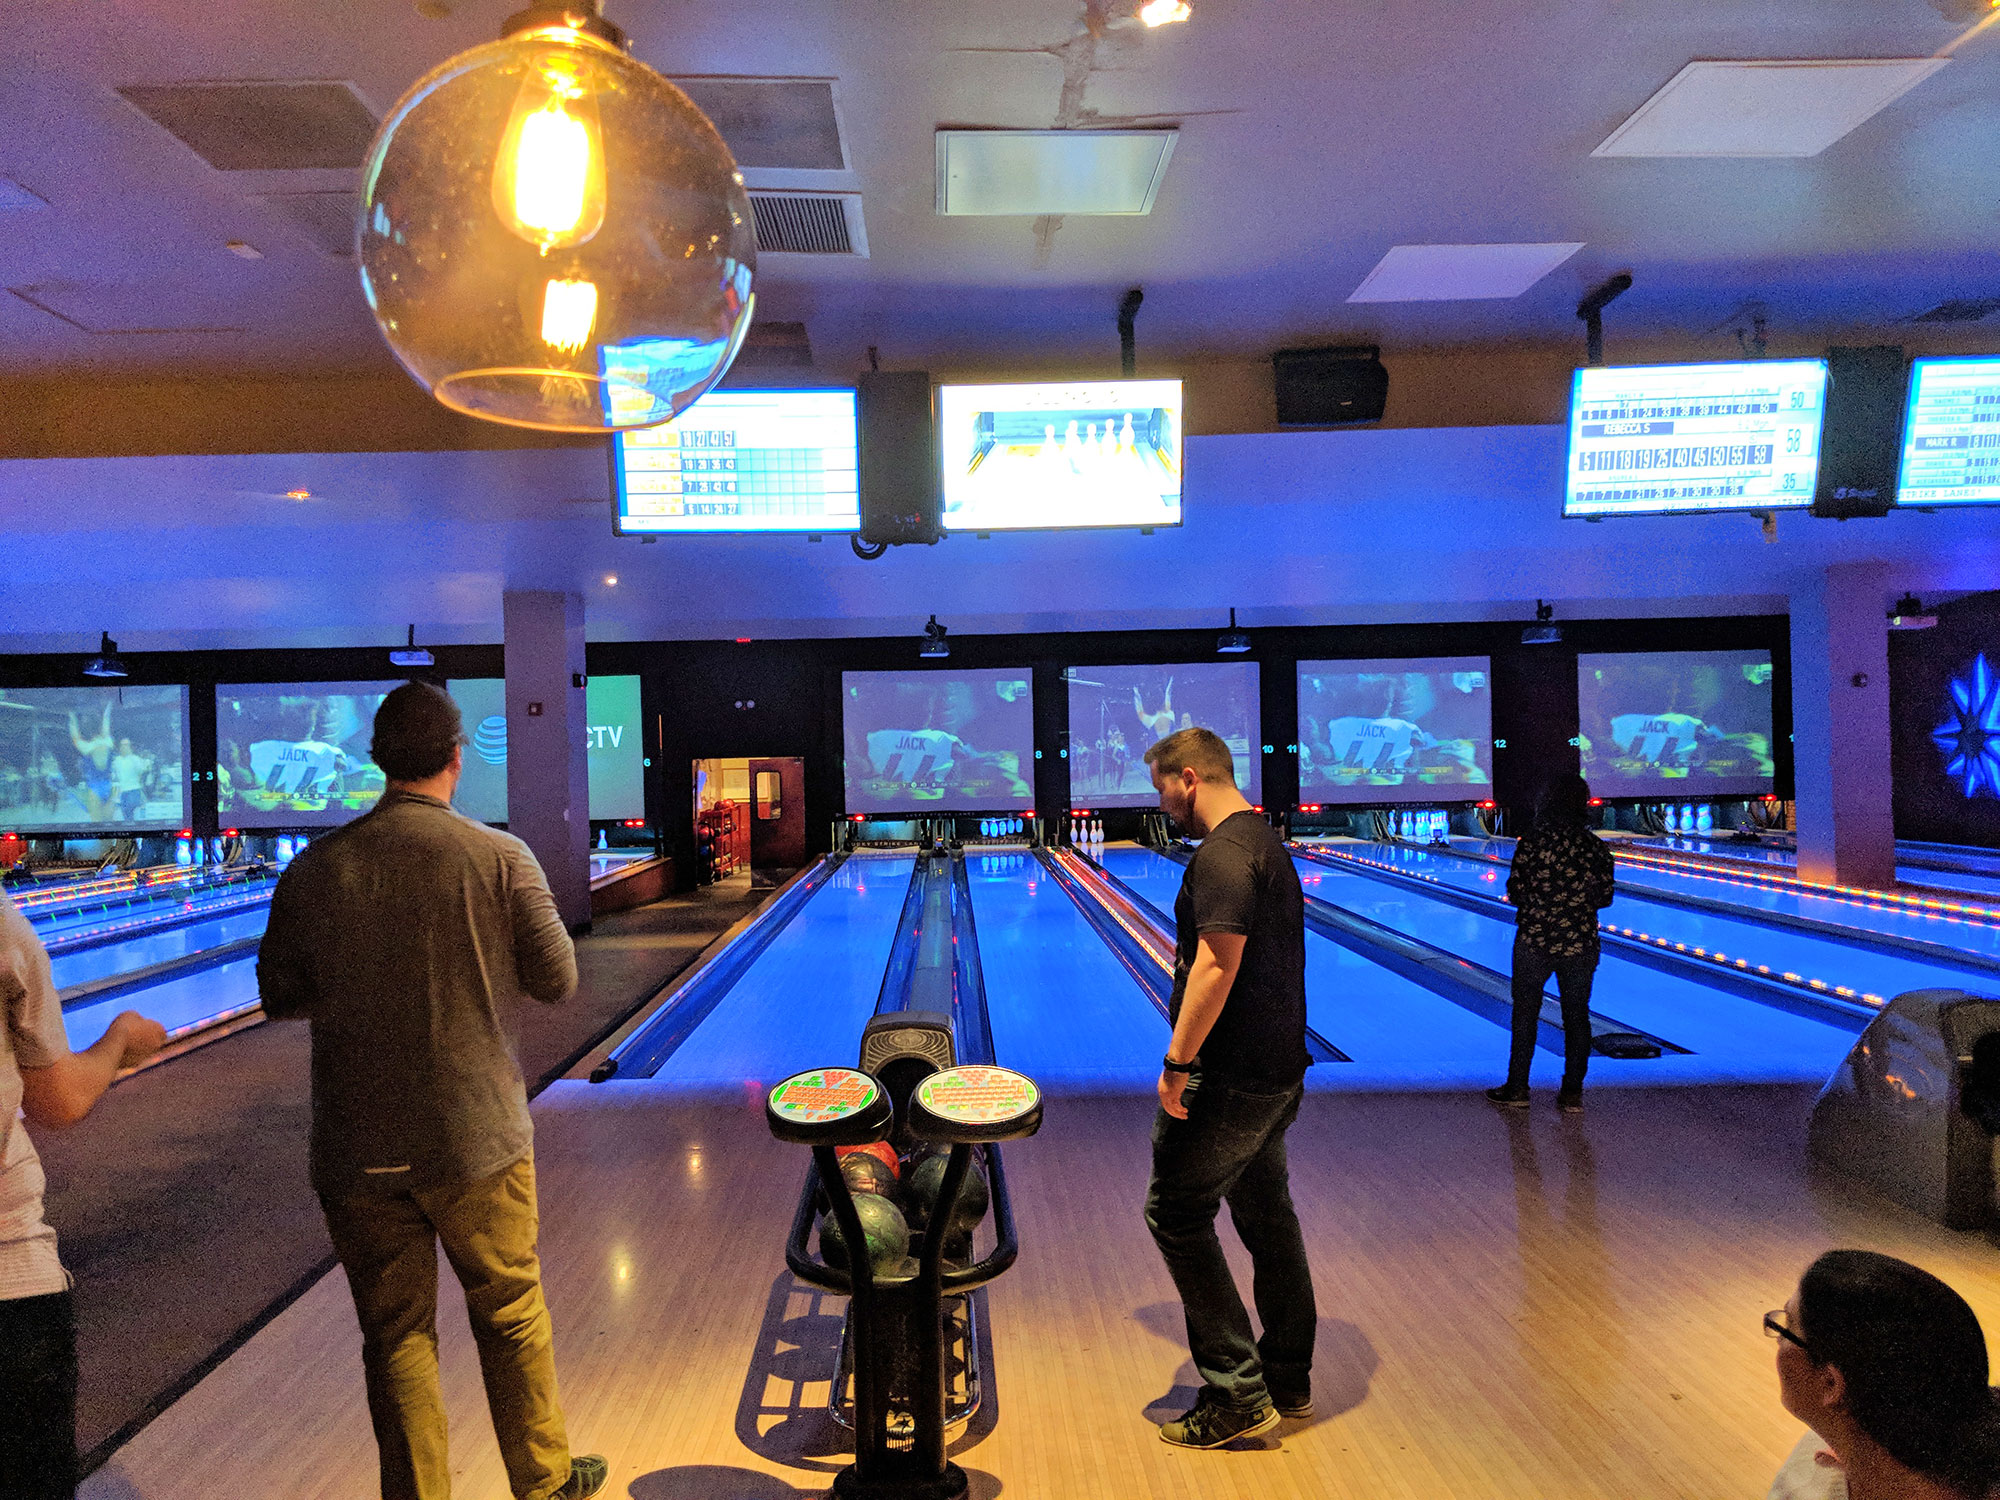 Trying our best to win the game during our weekly bowling league.